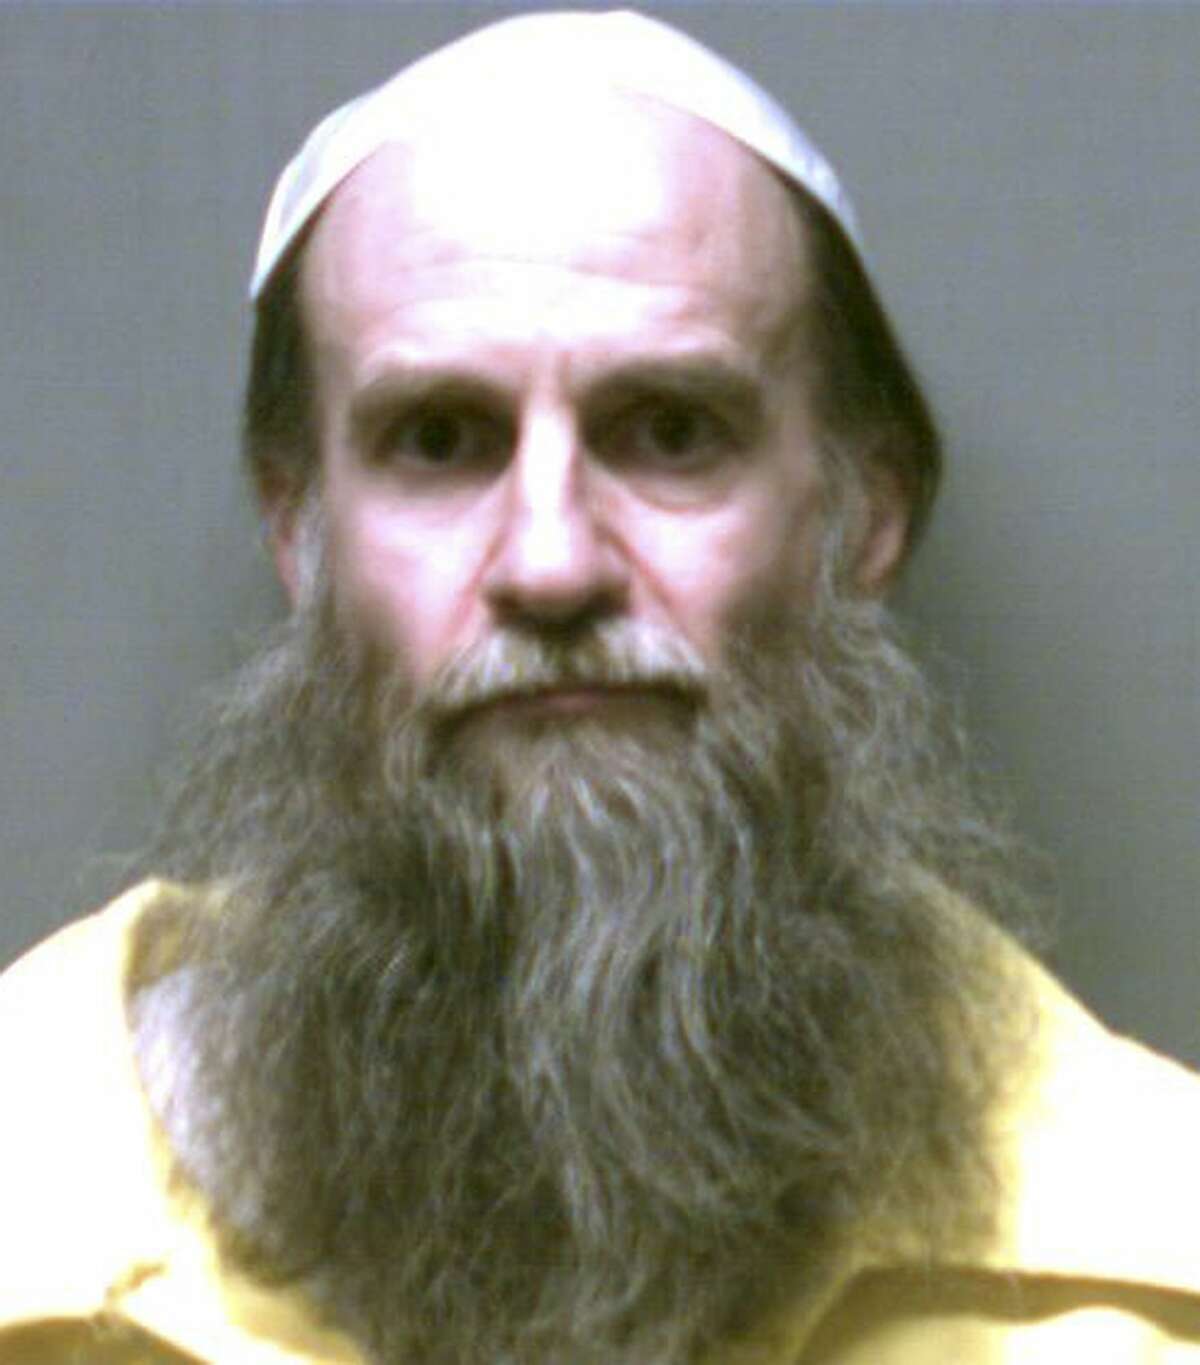 This undated inmate identification photo released Monday, Feb. 22, 2016, by the Connecticut Department of Correction shows Steven Hayes, convicted of murder and other crimes during a 2007 home invasion in Cheshire, Conn. Killed were Jennifer Hawke-Petit and her two daughters, ages 11 and 17. Her husband William Petit was severely beaten but survived. (Connecticut Department of Correction via AP)